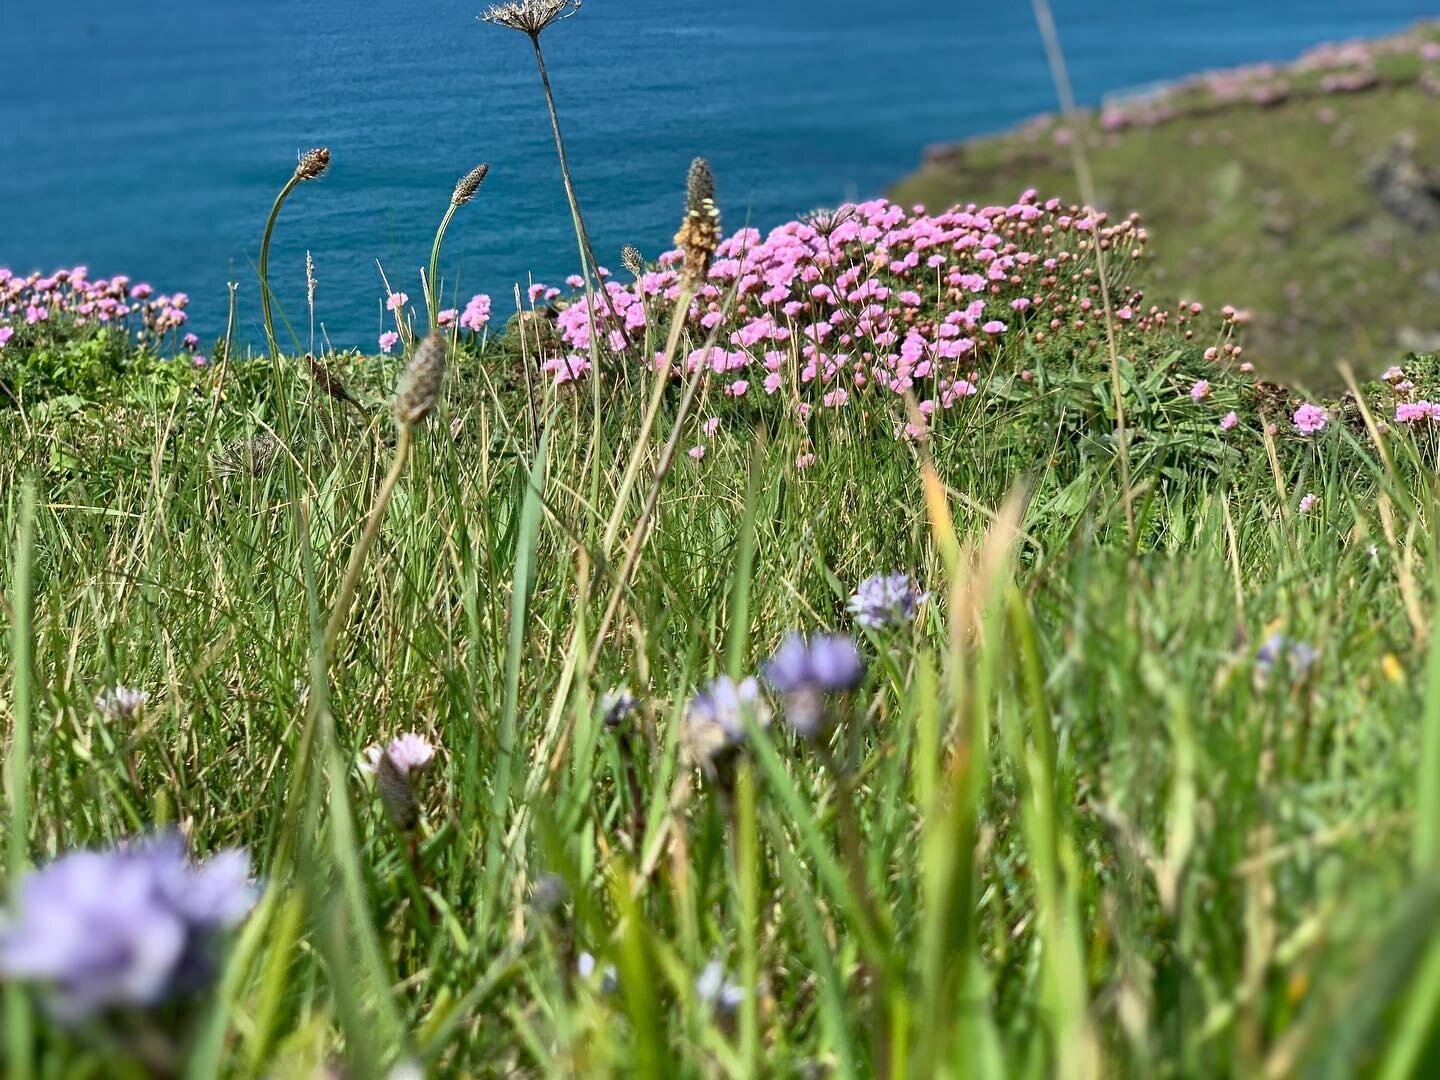 Colours of Cornwall 🌸
#pink
#blue
#springflowers